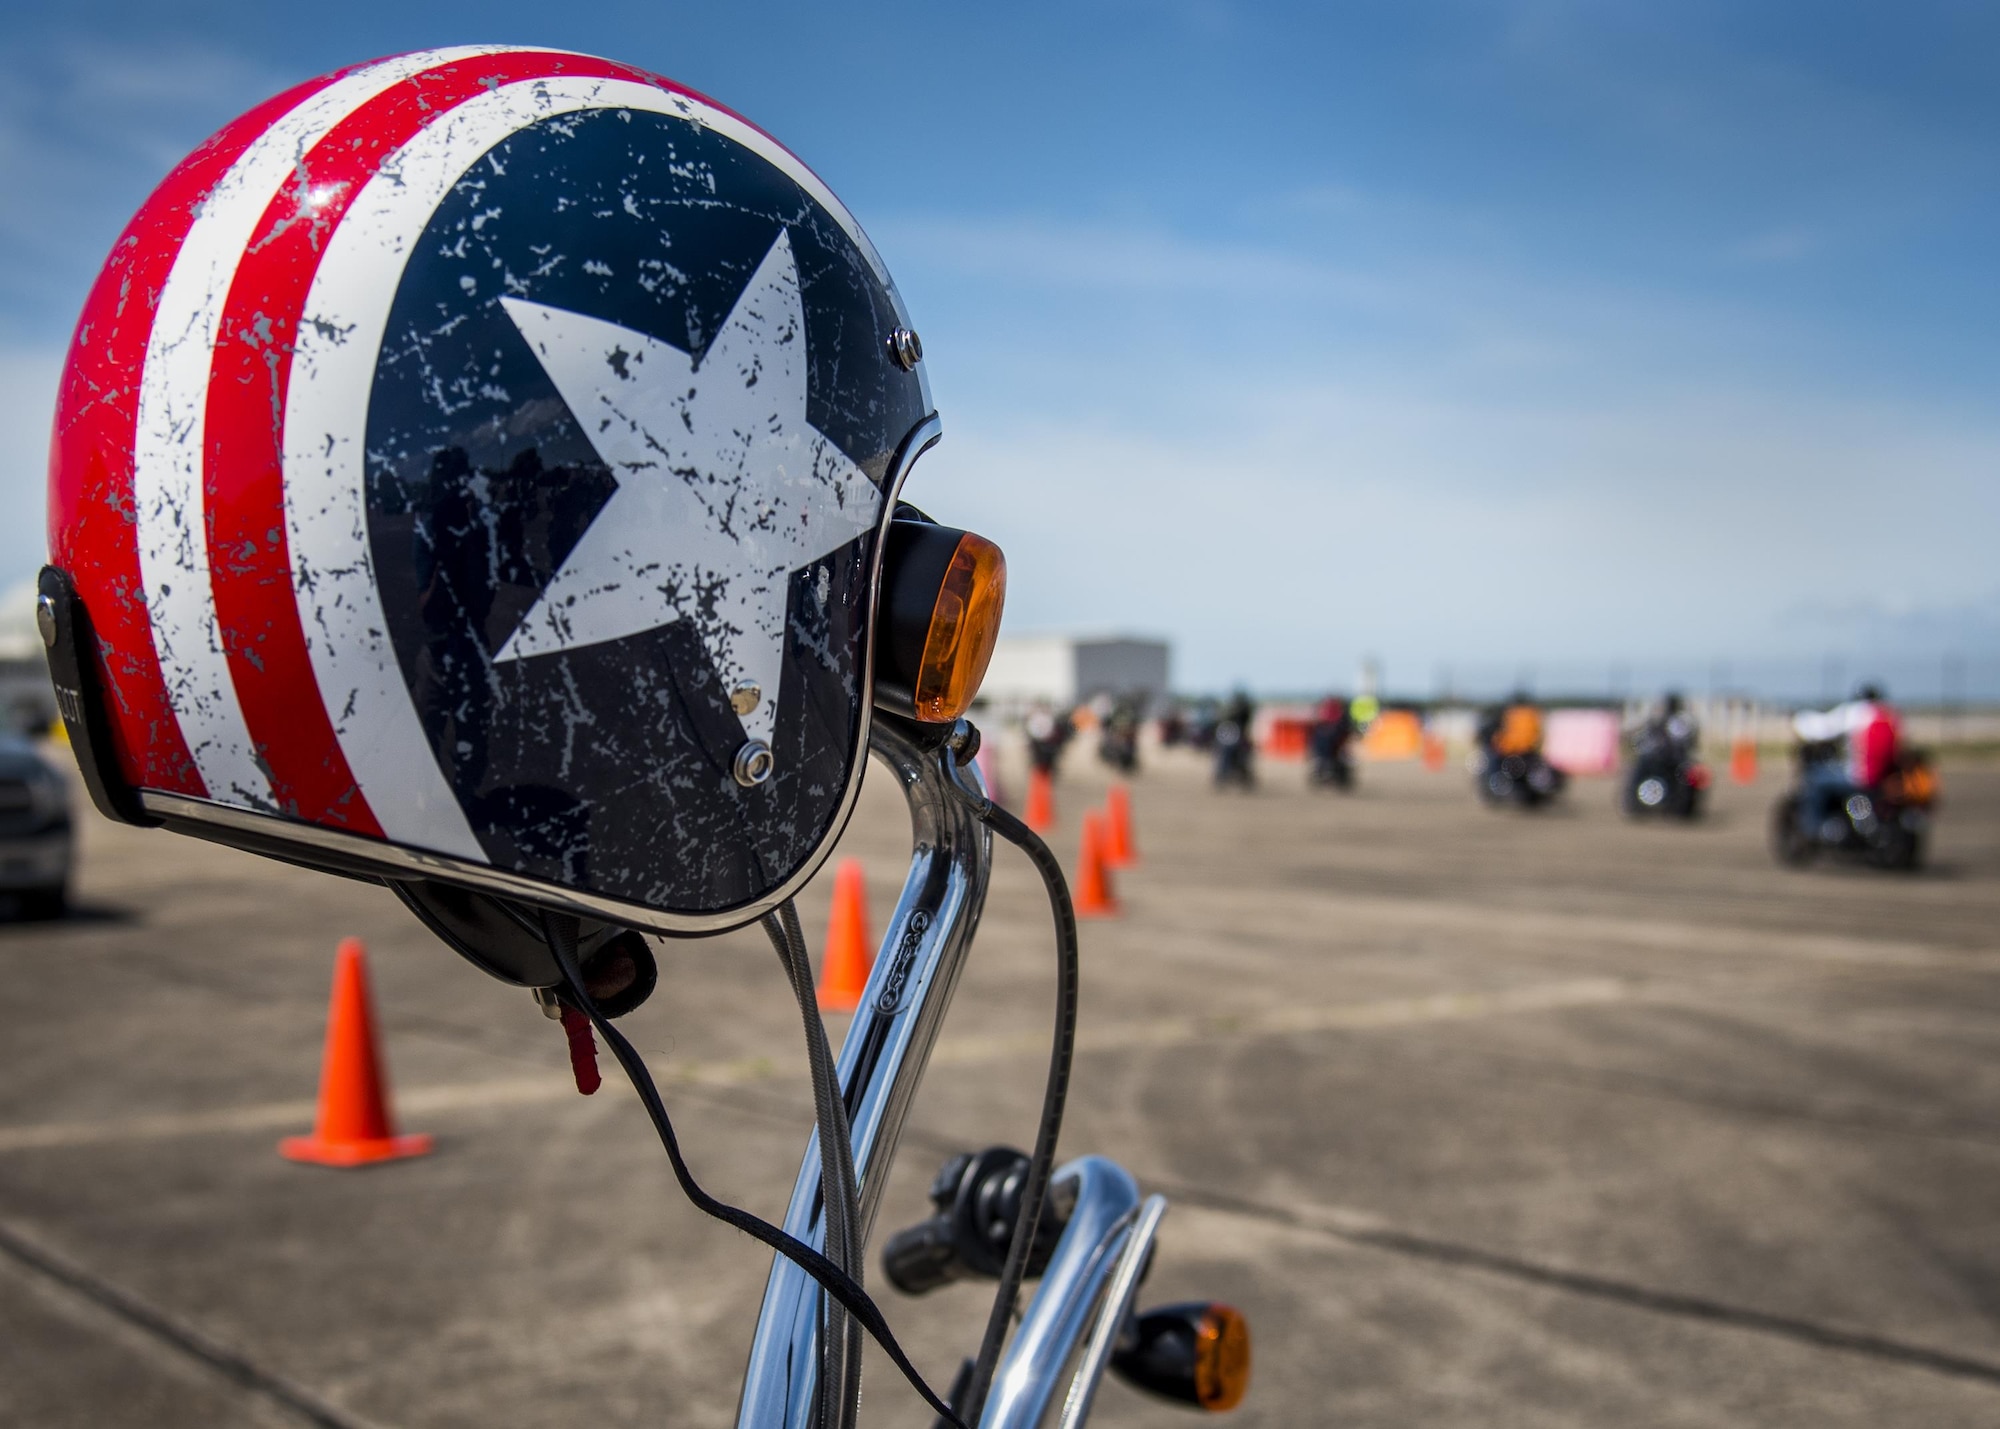 A bike and helmet wait for their rider as people roll out after the annual motorcycle safety rally at Eglin Air Force Base, Fla., April 14.  More than 500 motorcyclists came out for the event that meets the annual safety briefing requirement for base riders.  (U.S. Air Force photo/Samuel King Jr.)